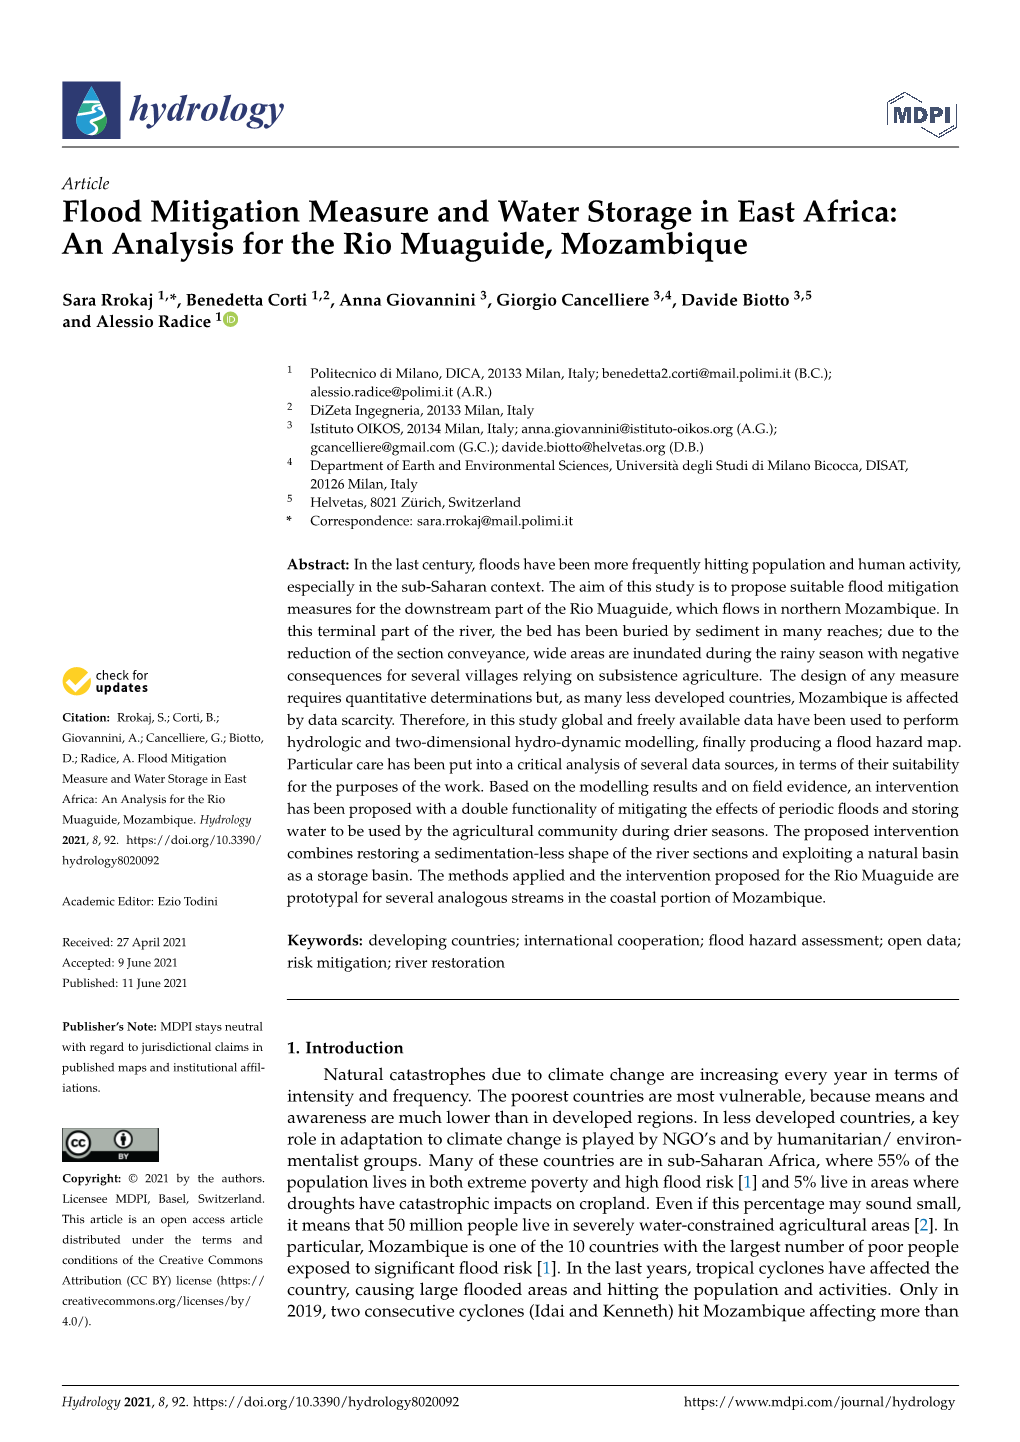 Flood Mitigation Measure and Water Storage in East Africa: an Analysis for the Rio Muaguide, Mozambique